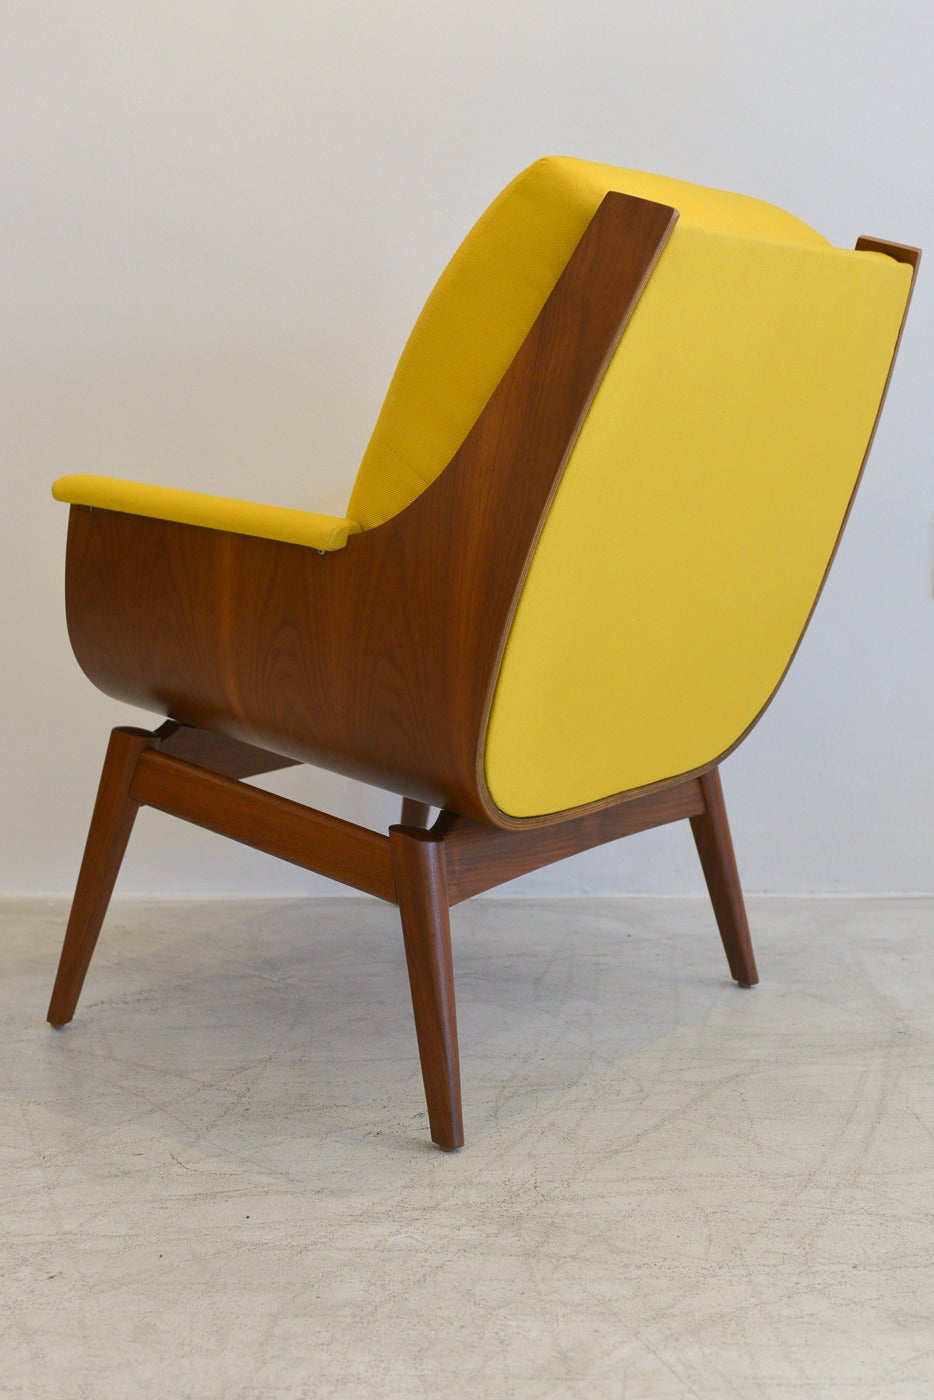 Incredibly rare and amazing walnut ply bentwood chair by Kodawood with new bright yellow upholstery and professionally restored wood. Showroom perfect condition, this chair will add a pop of color and fun to any decor. Great unusual clamshell